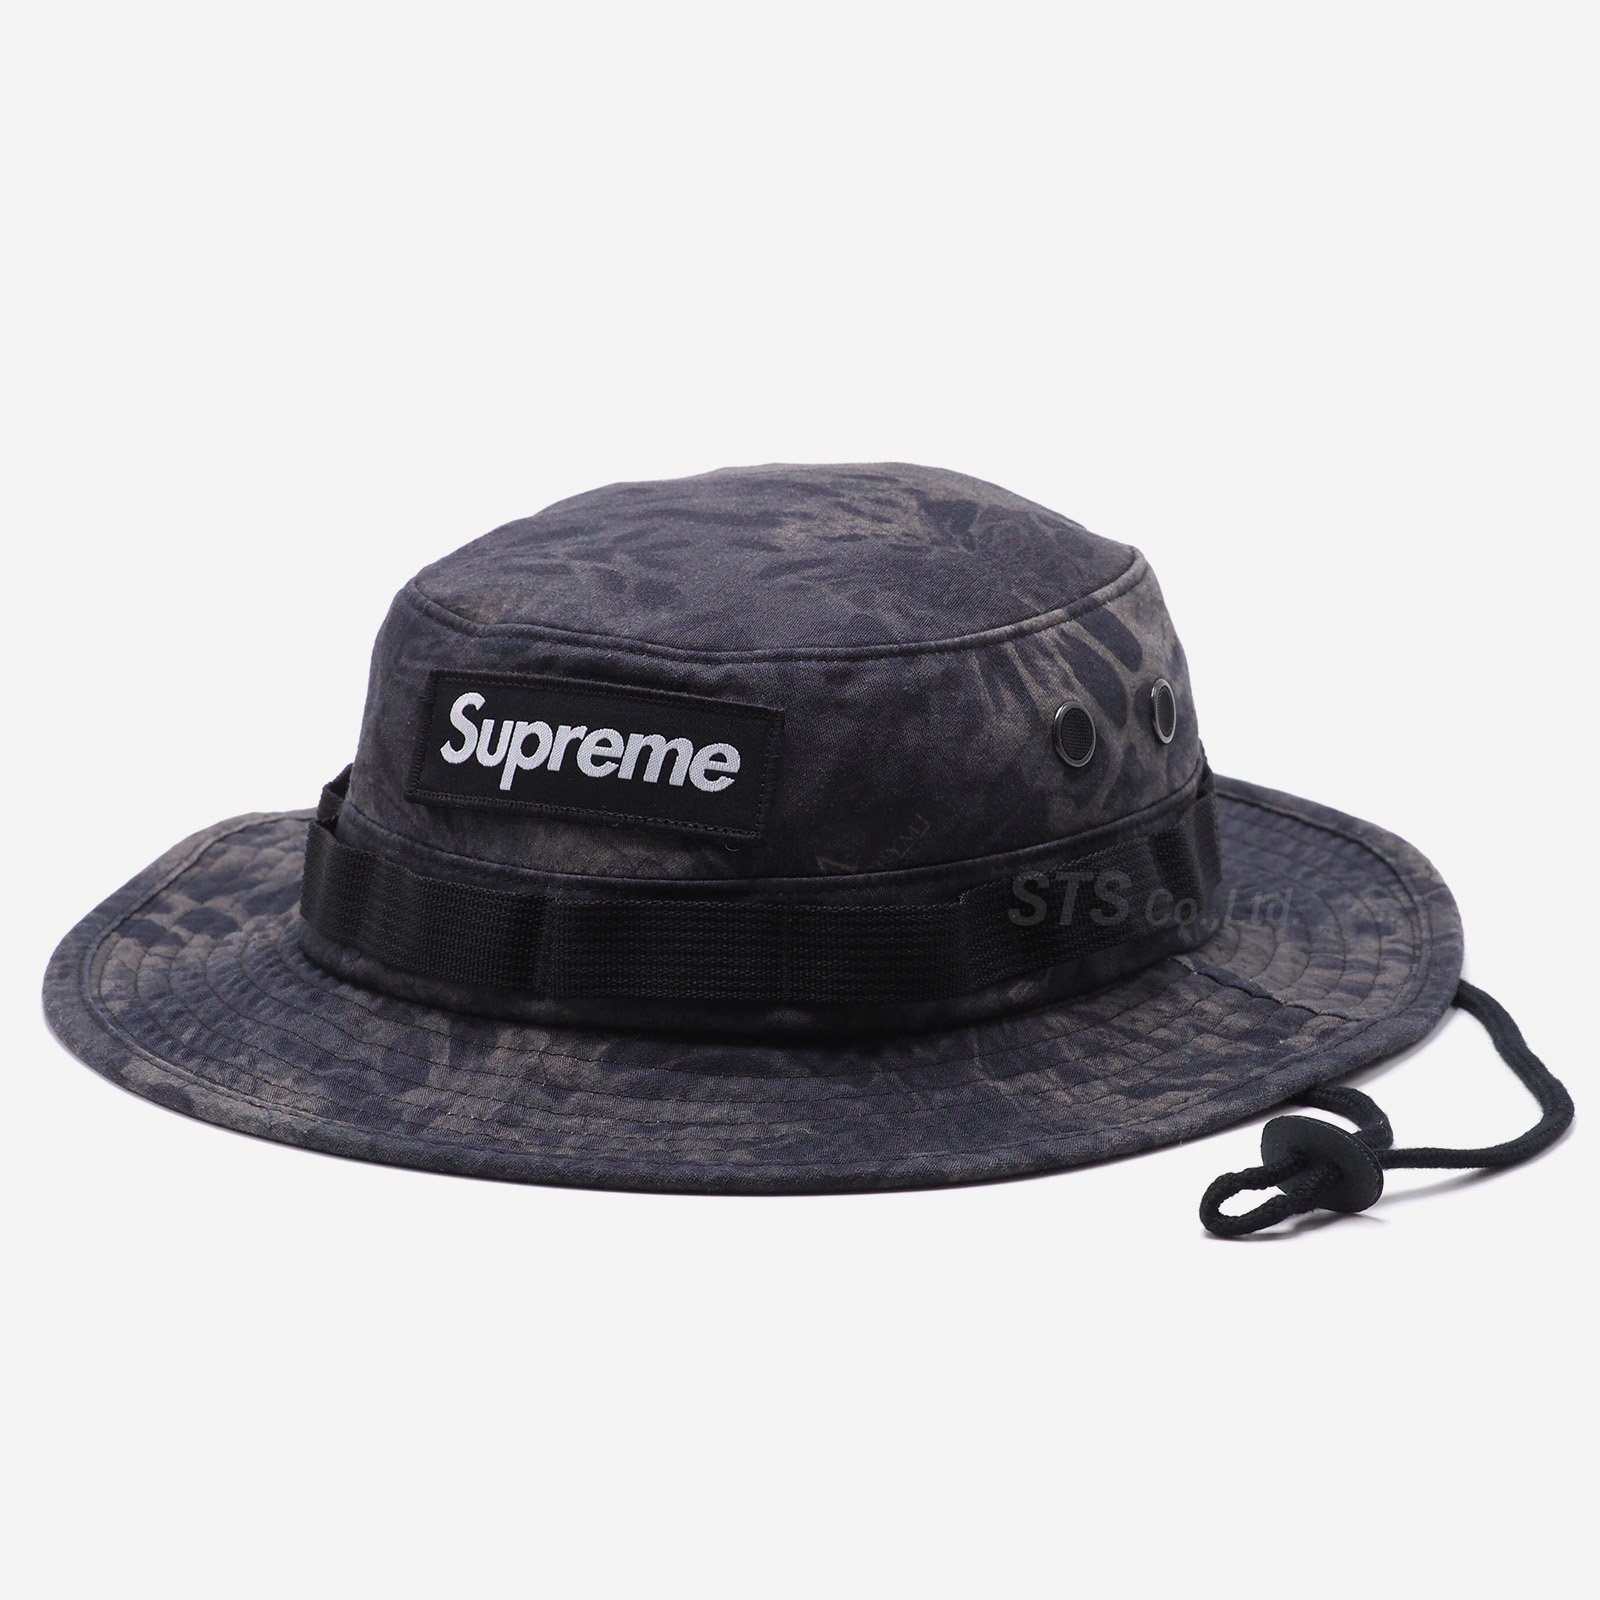 Supreme☆Military Boonie M/Lミリタリーブーニーハット | kensysgas.com